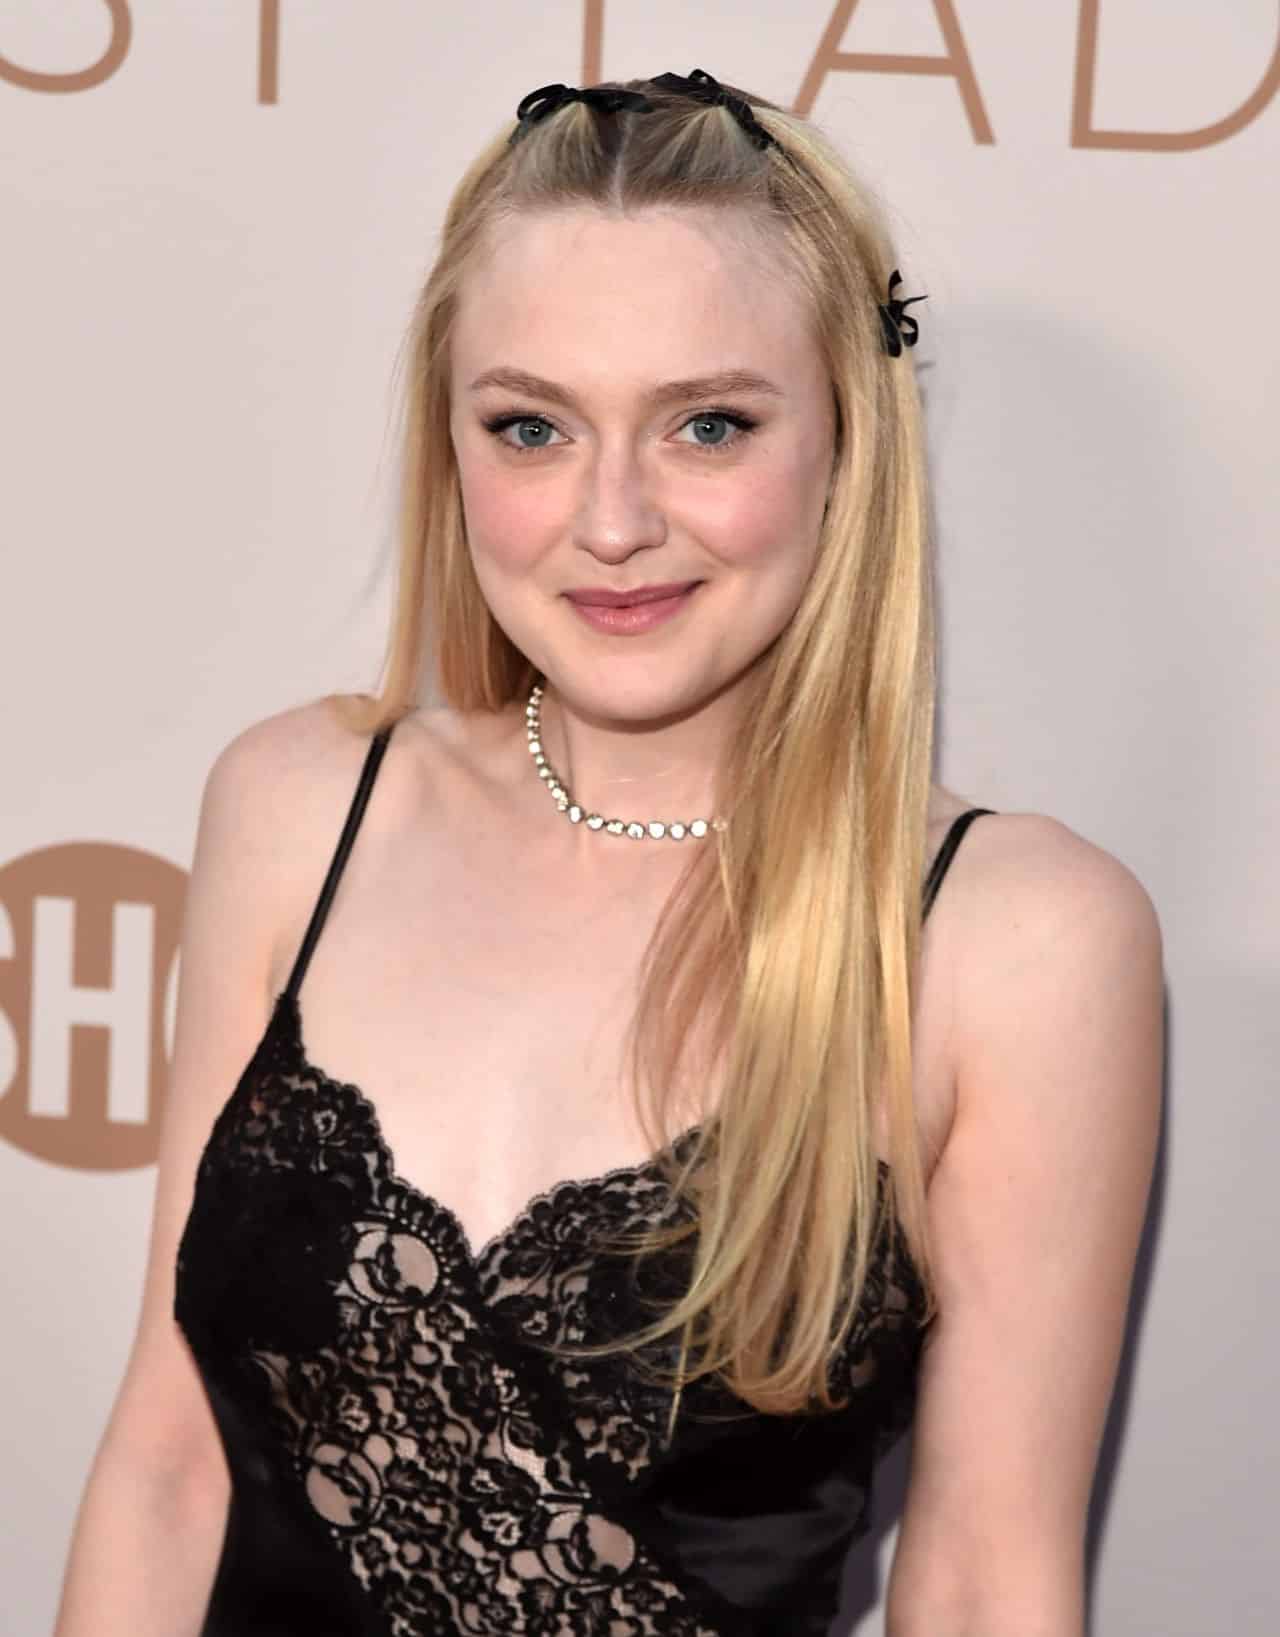 Dakota Fanning Wore a Black Sheer Dress at The First Lady Premiere in LA